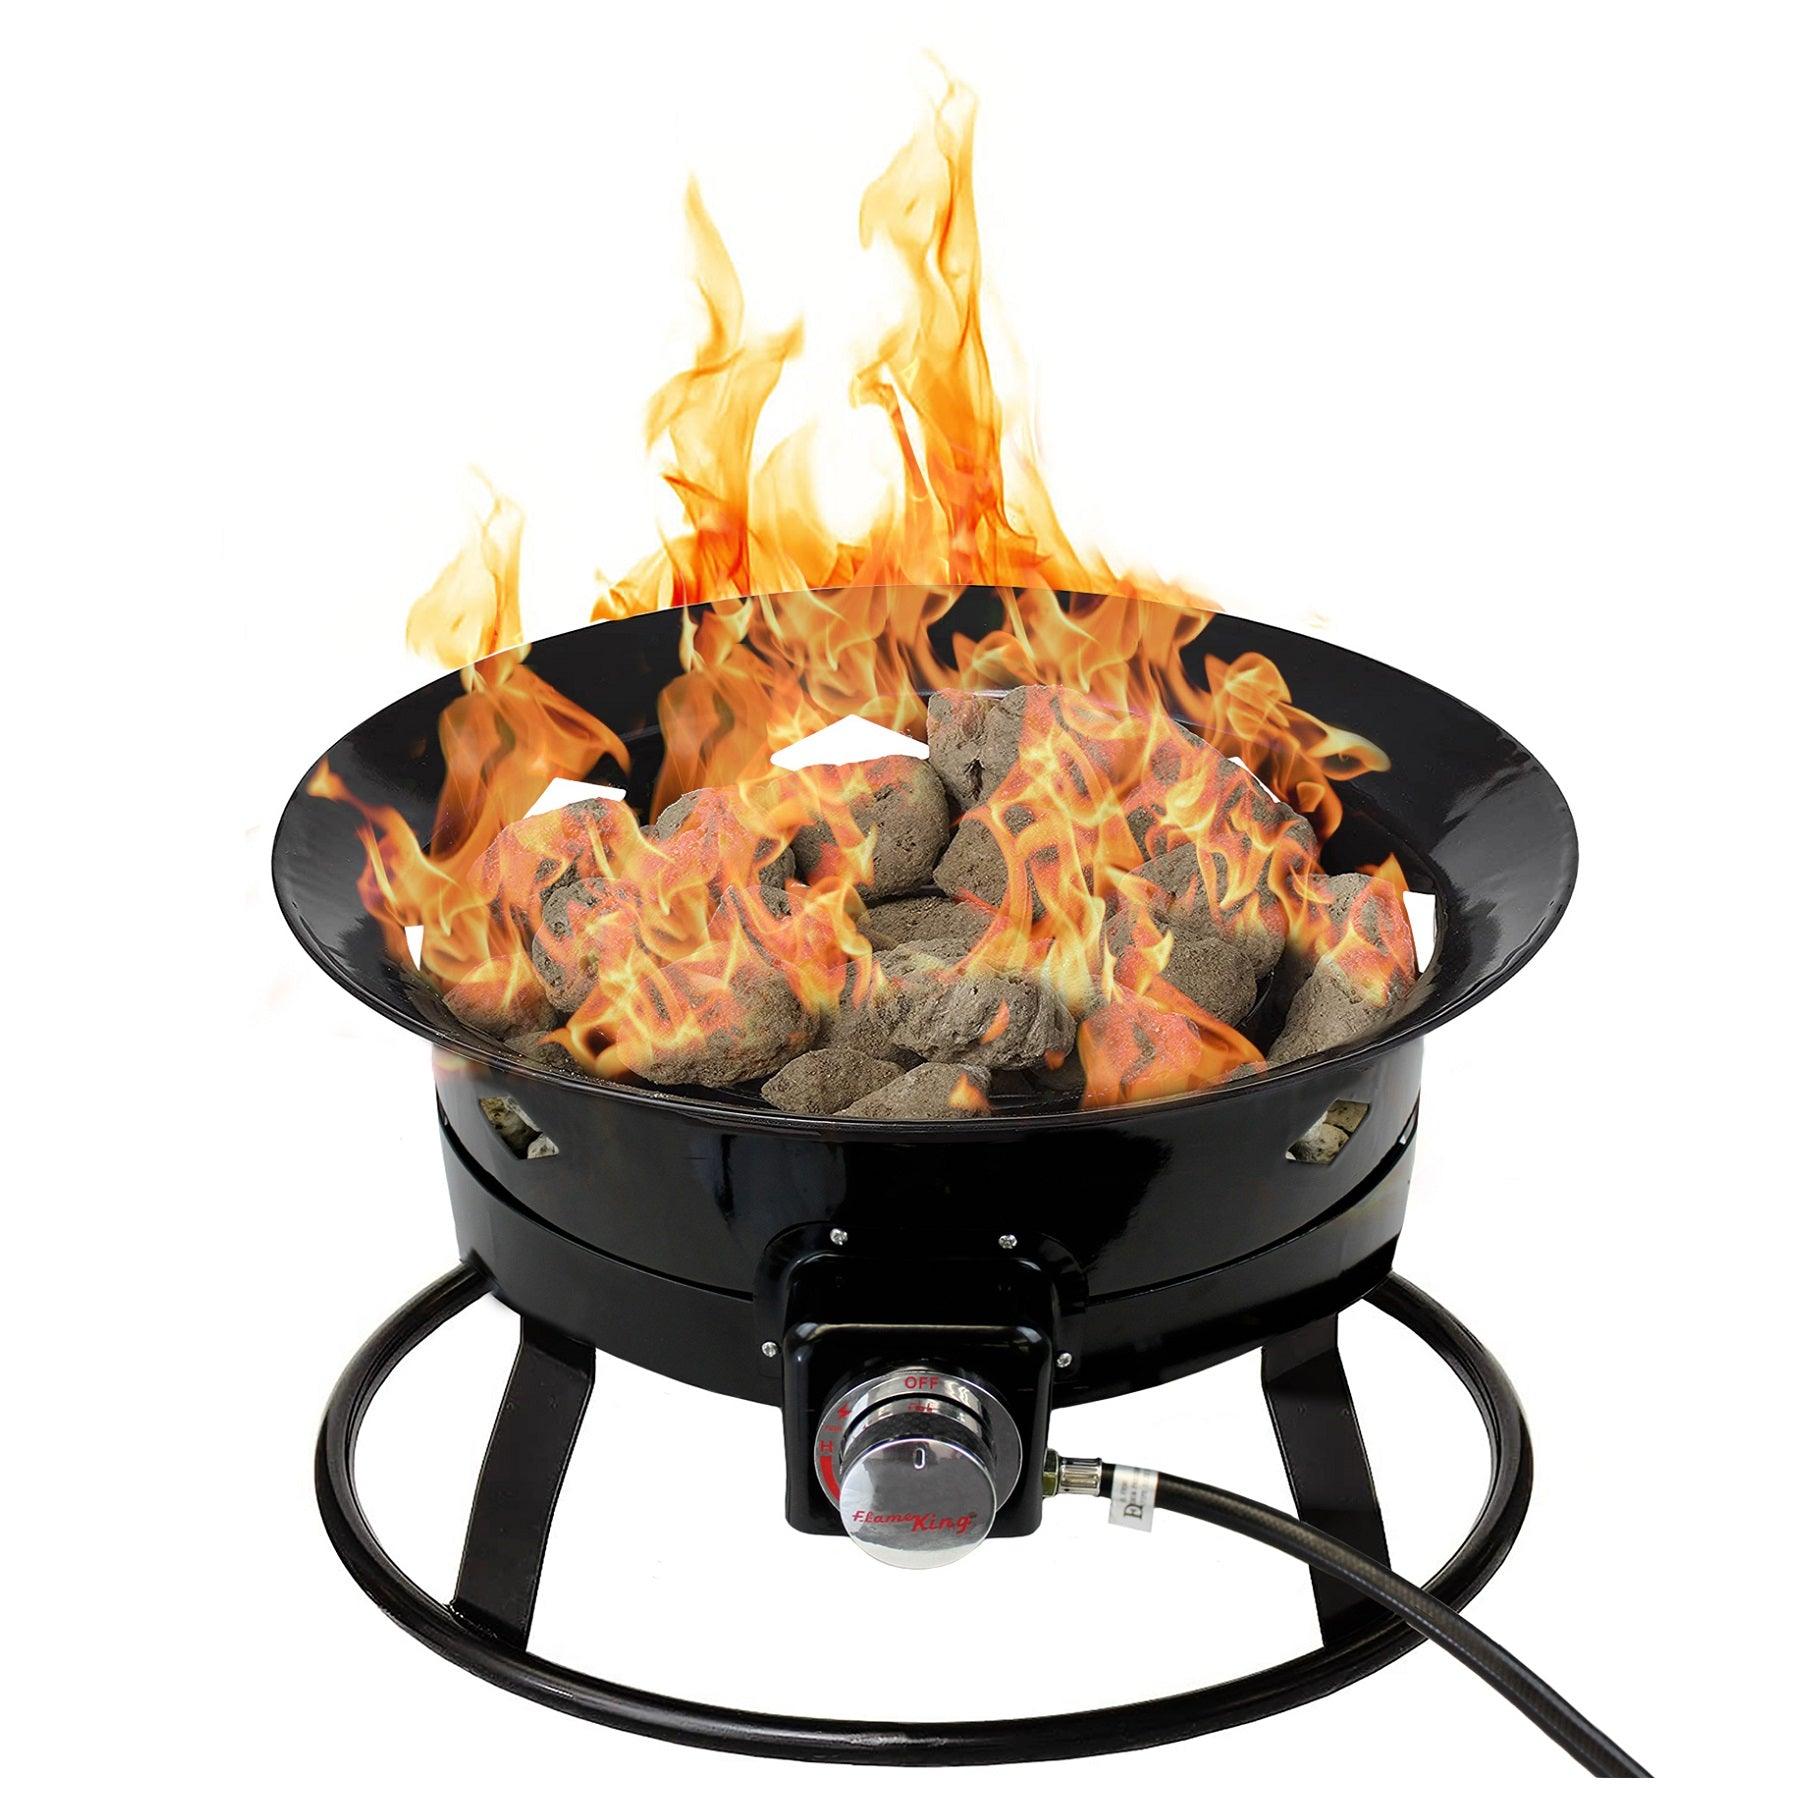 Flame King Outdoor Portable Propane Gas 19″ Fire Pit Bowl with Self Igniter, Cover, and Carry Straps - Flame King